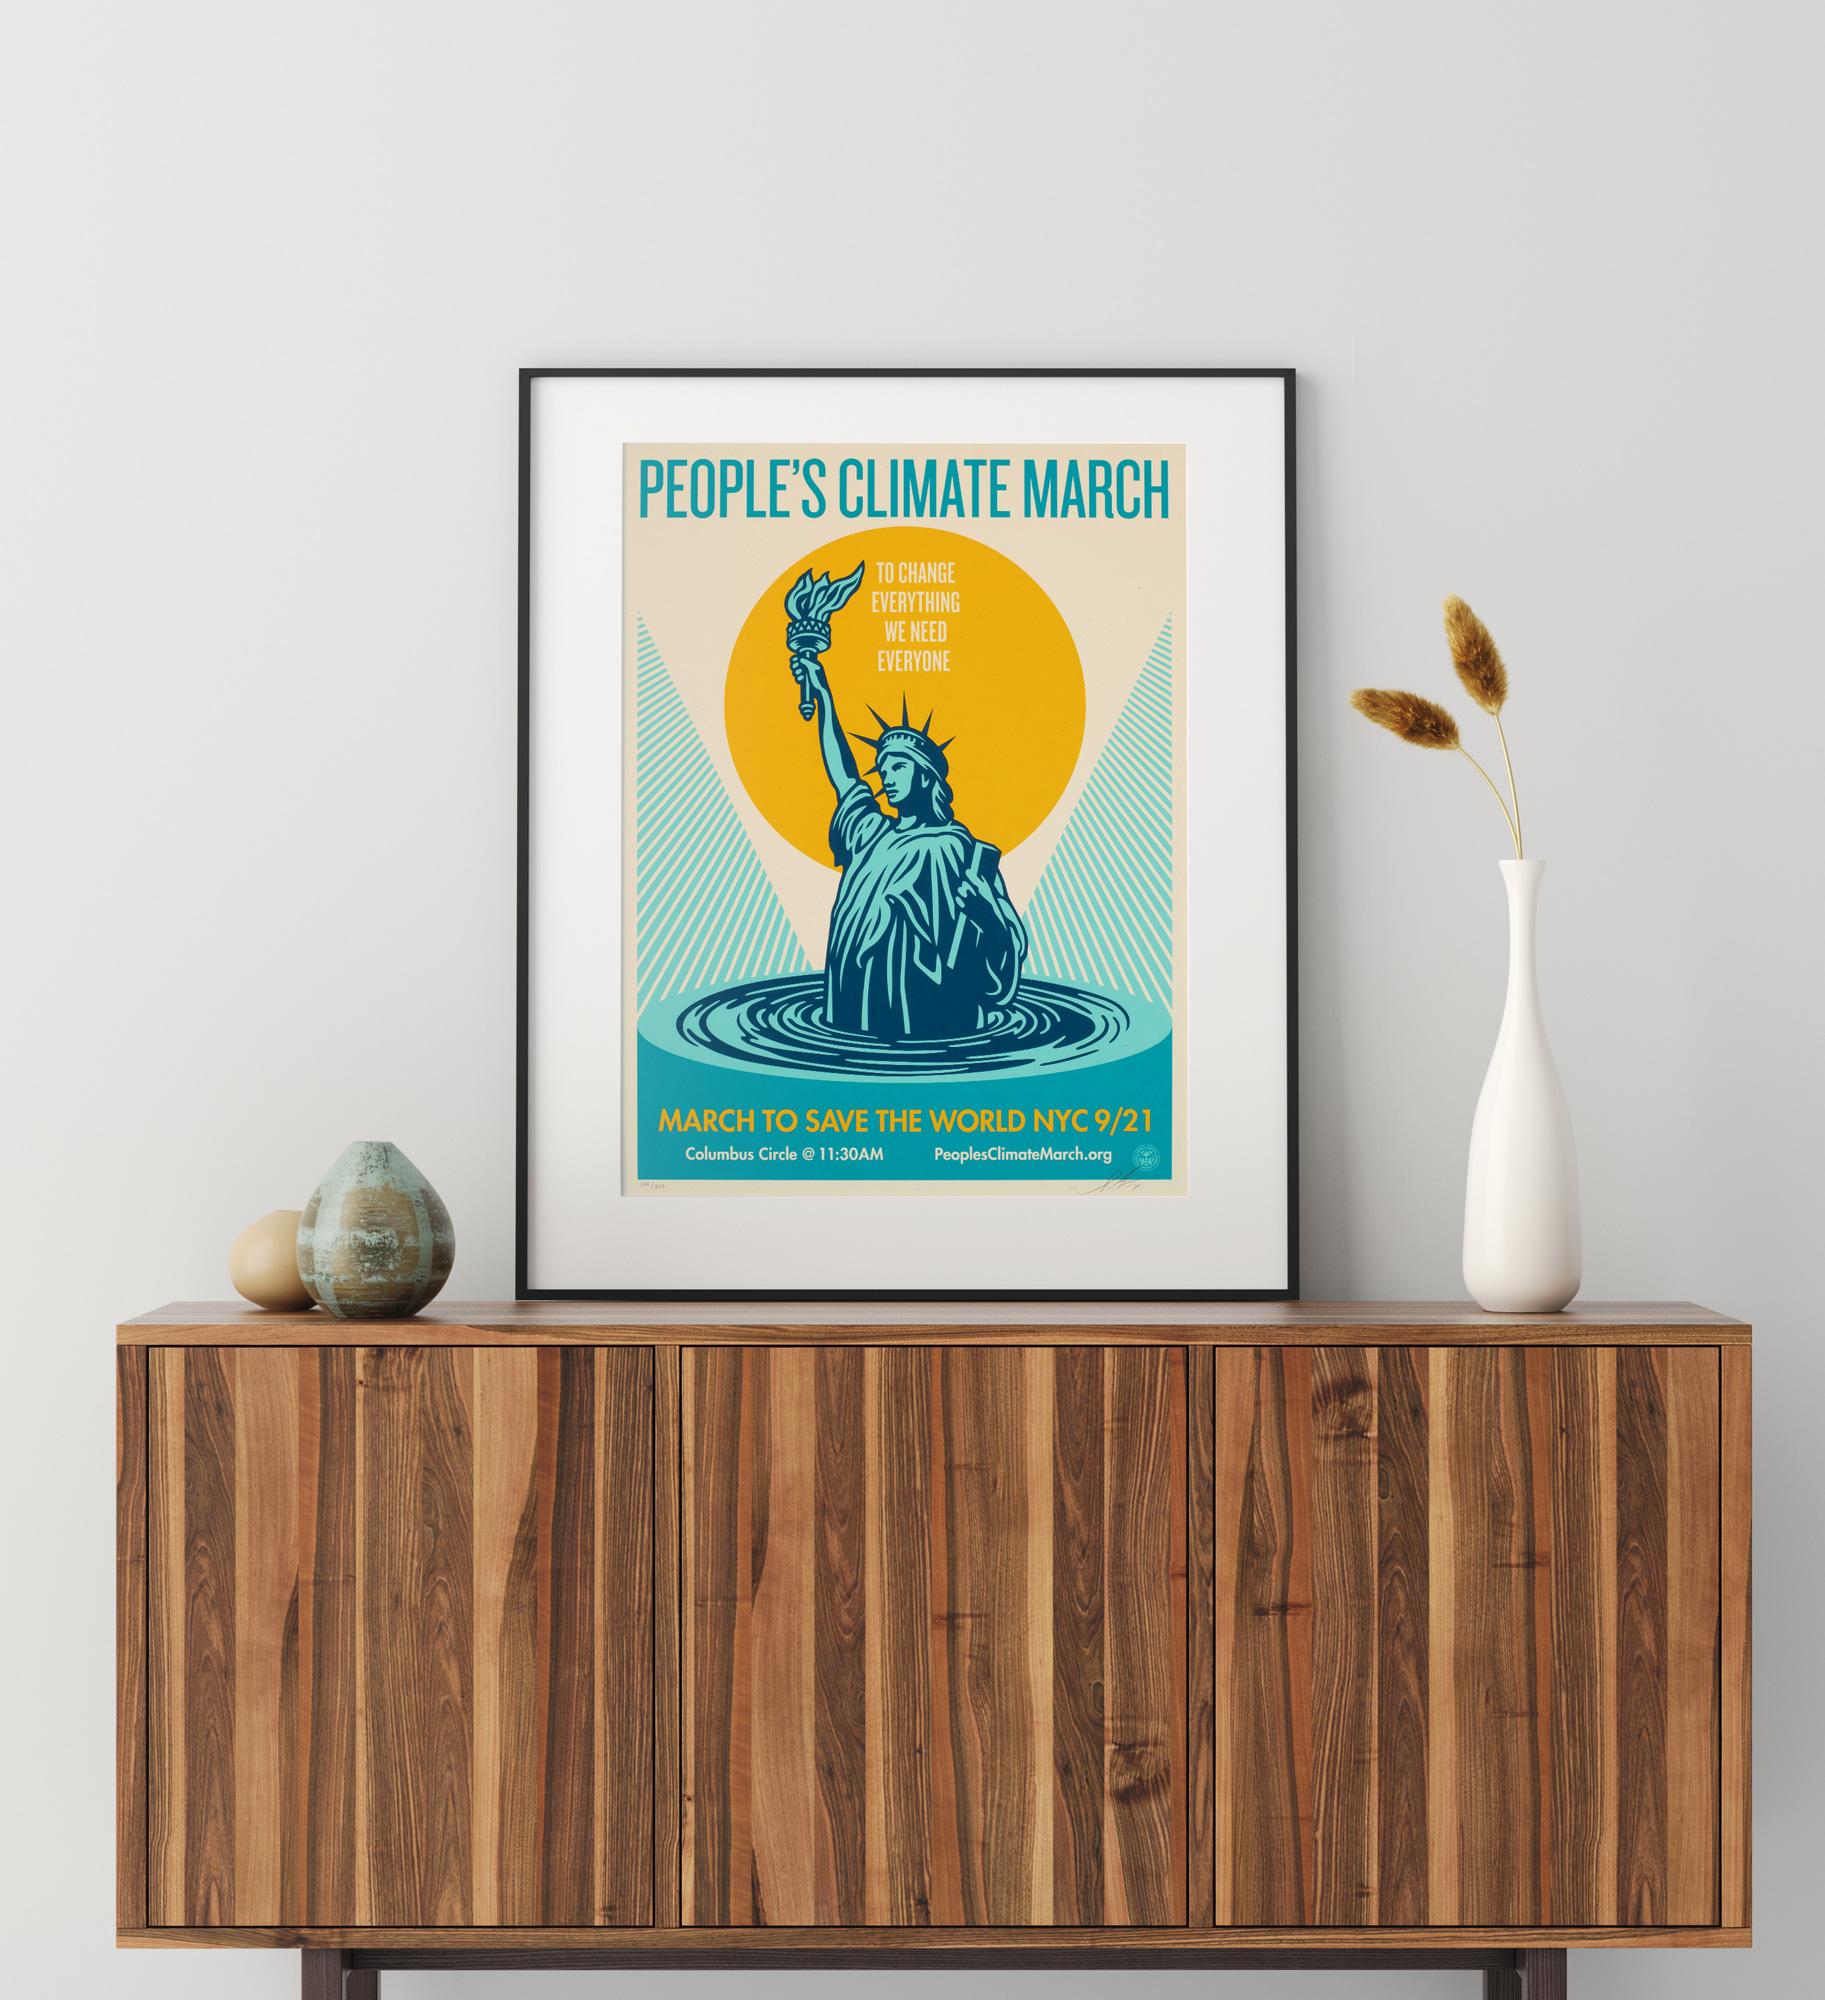 We love this striking limited edition screenprint by Shepard Fairey. Stunning colours and superb, powerful graphics depicting the iconic Statue of Liberty against a growing seering sun and drowning in rising sea levels.

Fairey created it for the